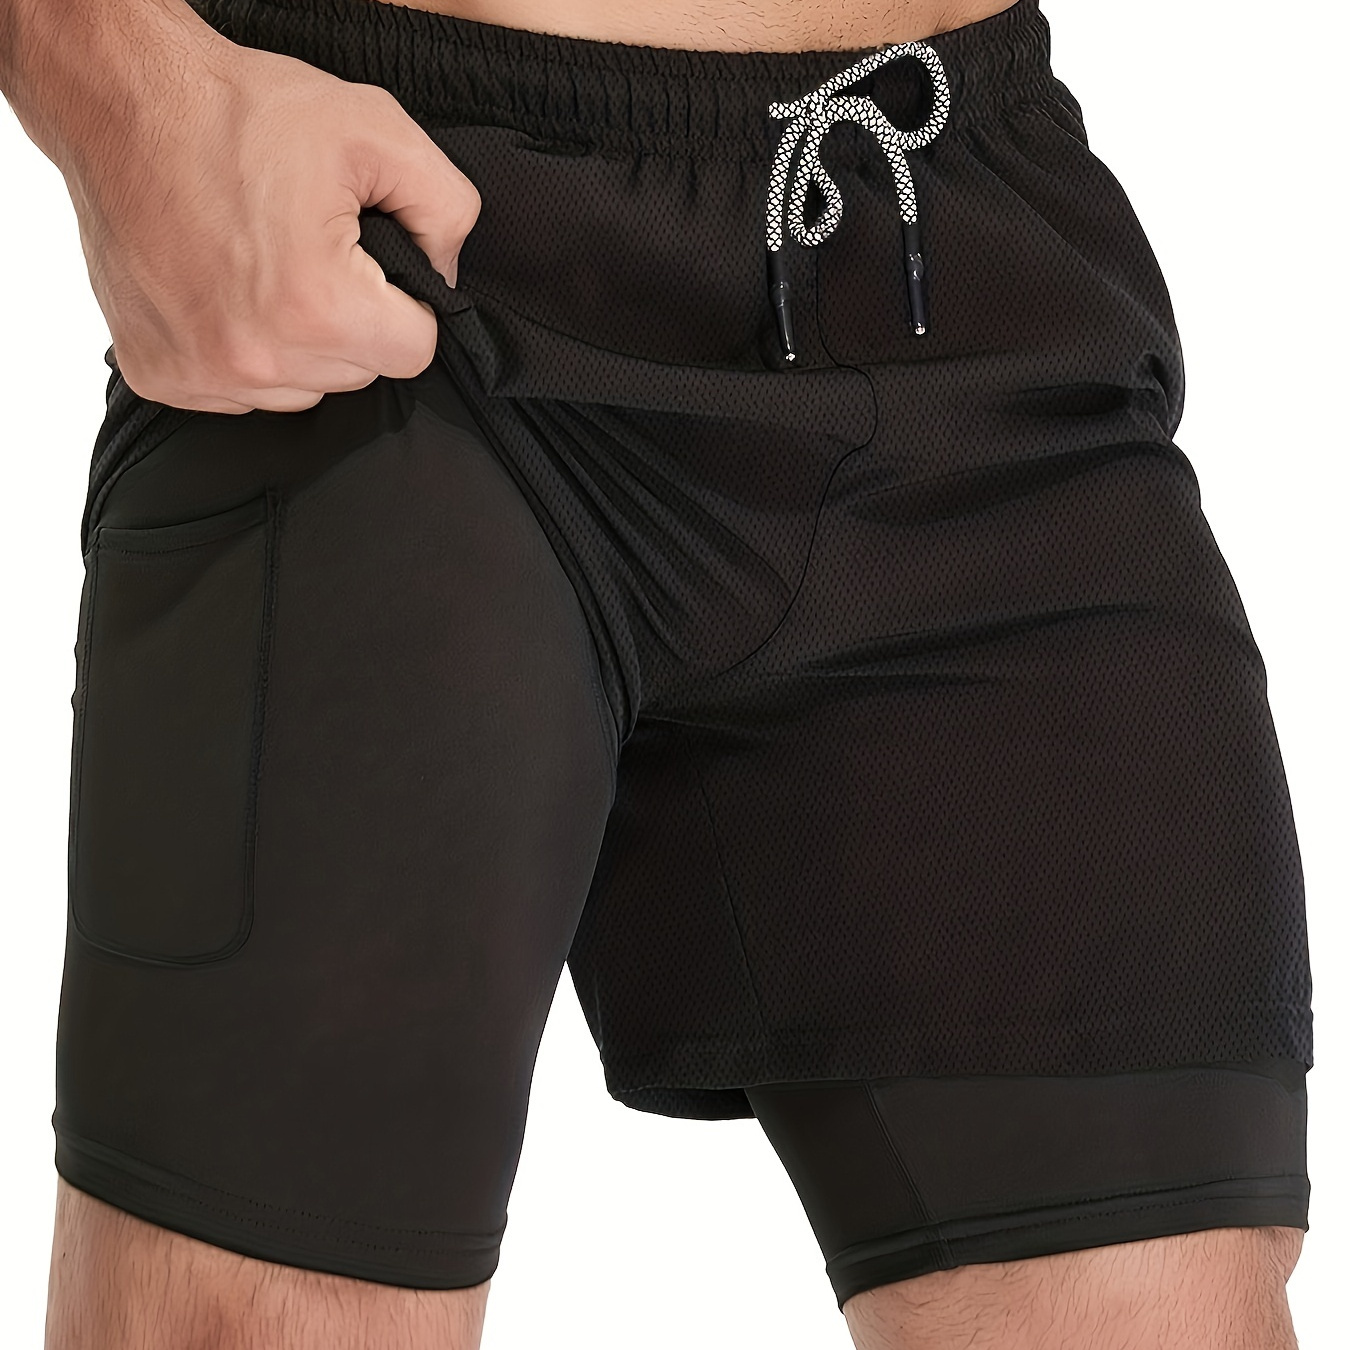 

Men's Stylish Loose Solid Shorts With Pockets, Active Breathable Comfy Medium Stretch Drawstring Shorts For Hiking Jogging Cycling Outdoor Fitness Workout